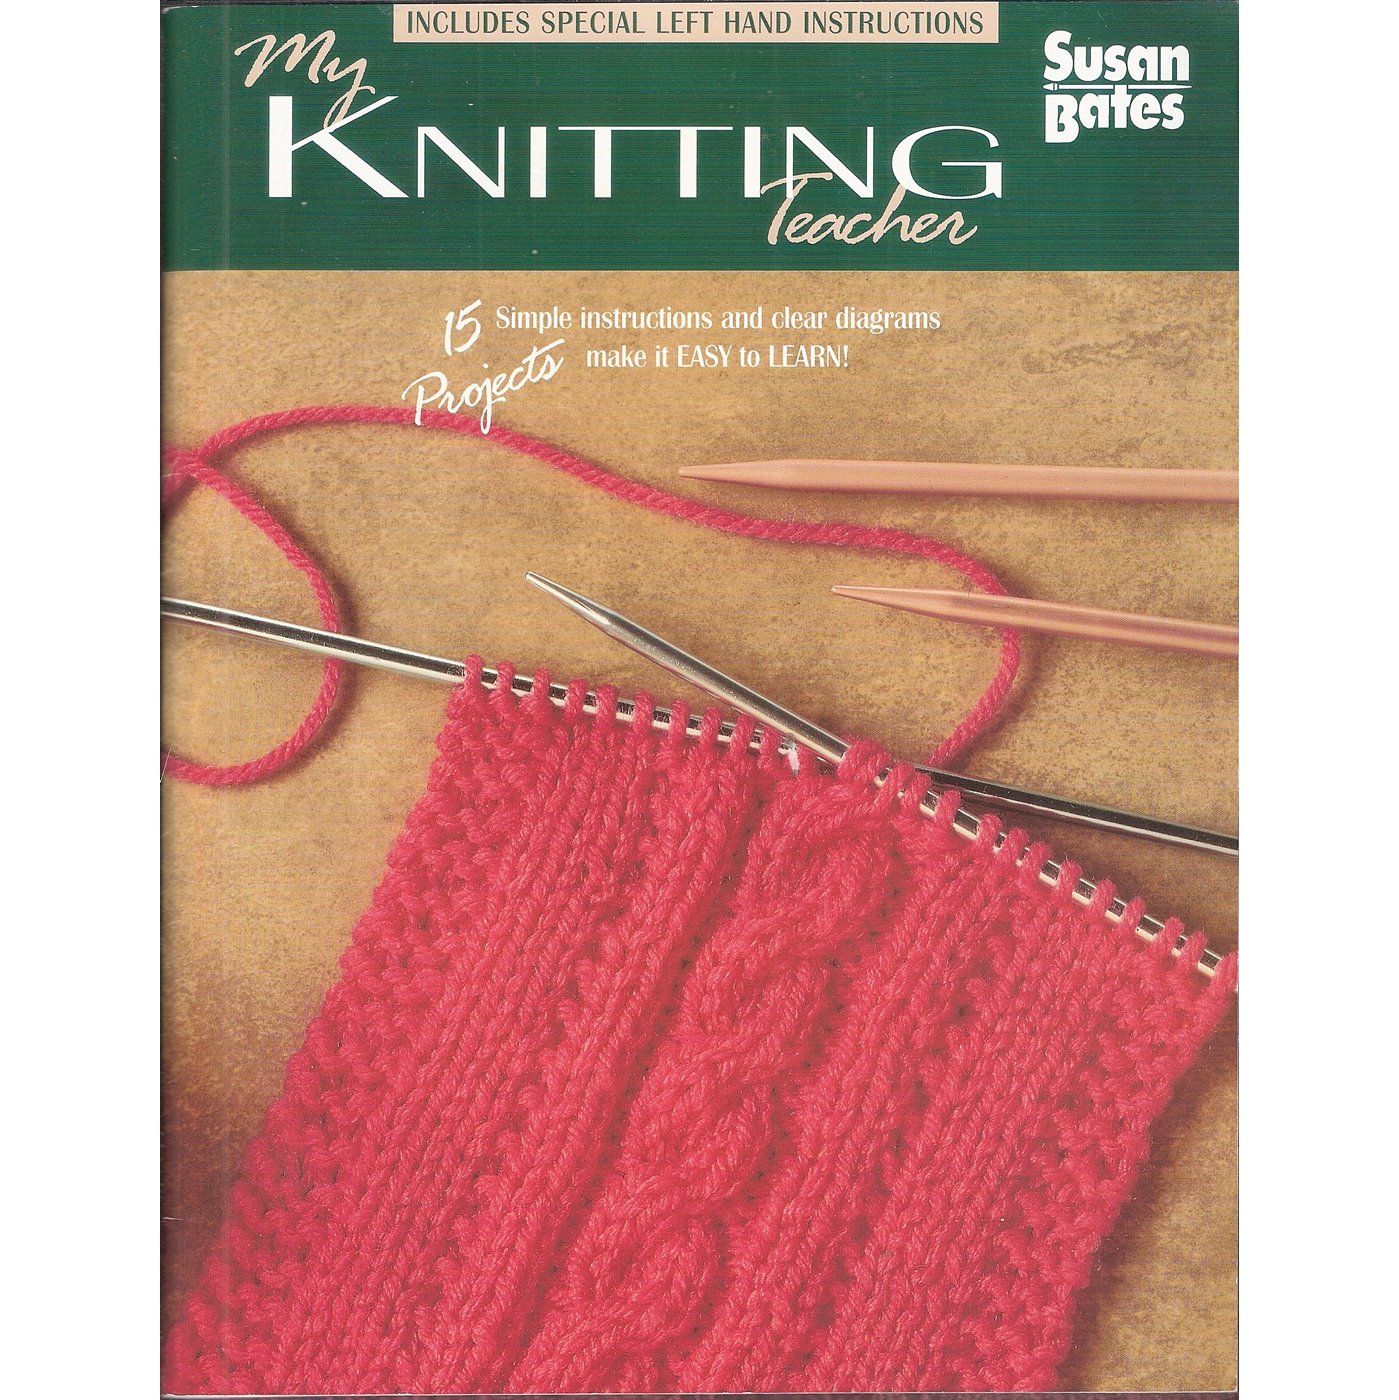 My Knitting Teacher For Right or Left handers 15 Projects Susan Bates Coats & Clark 17380